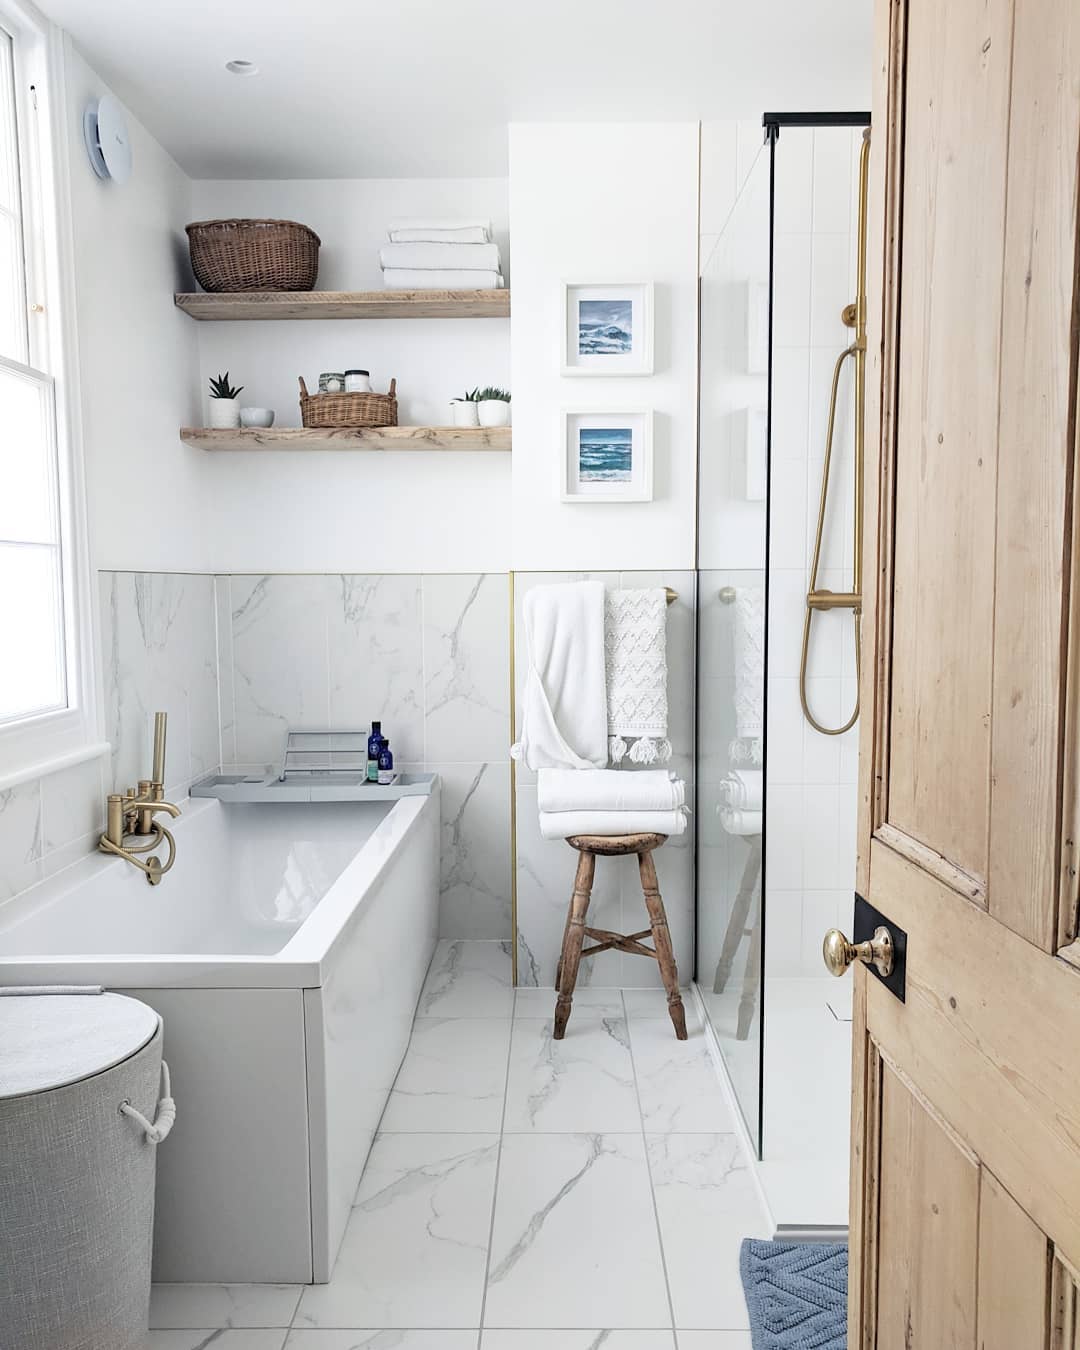 Marble bathroom featuring a stand-up shower, bathtub, shelves, and an exhaust fan. Photo by Instagram user @elizabethdanoninteriortherapy.